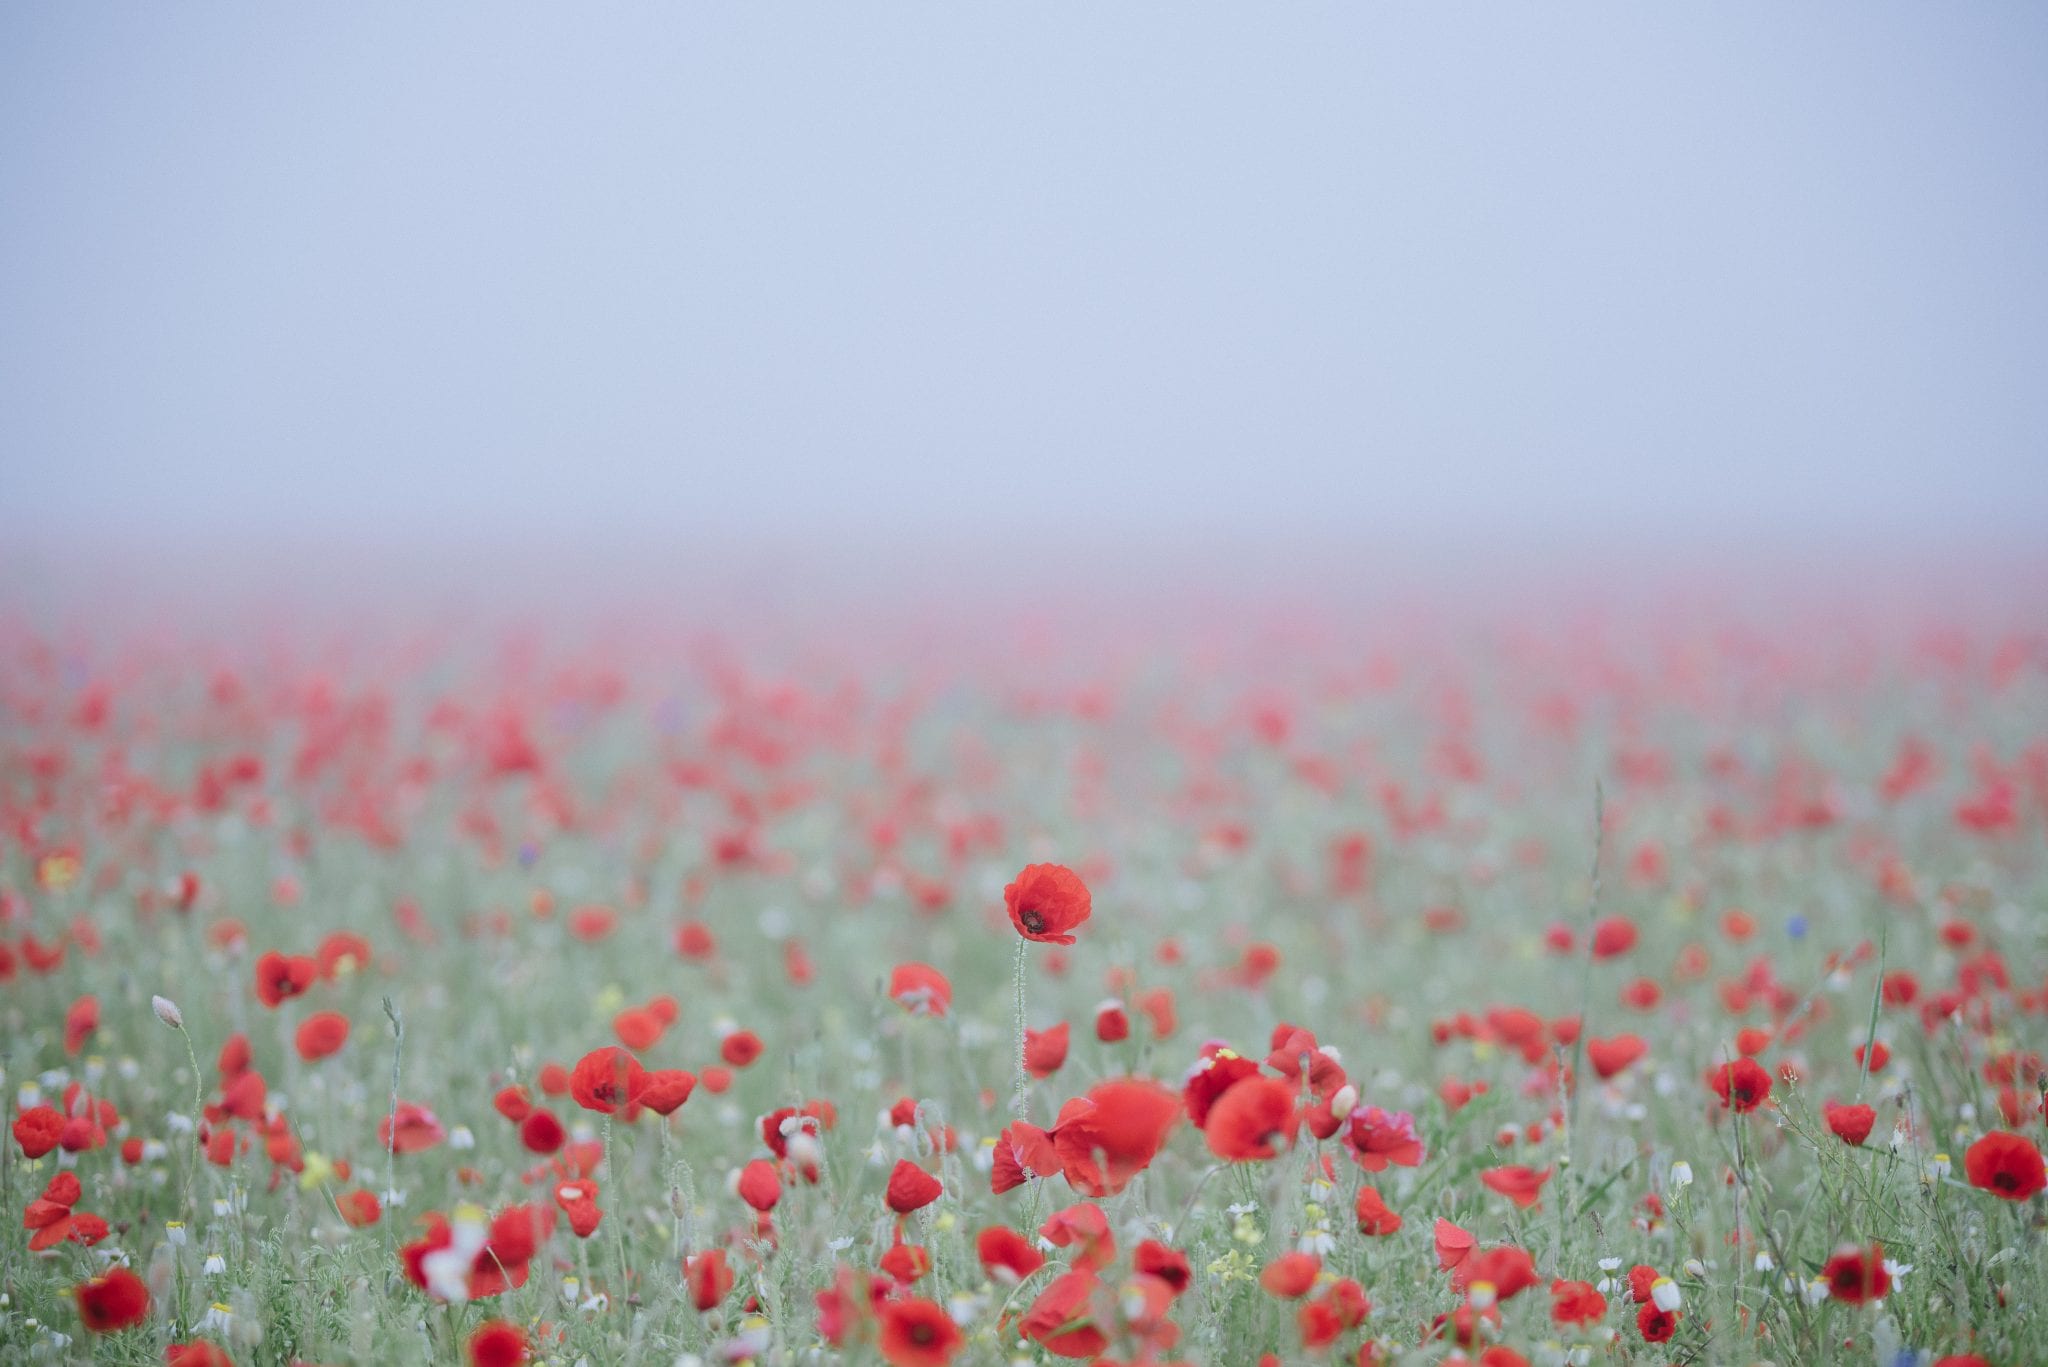 Remembrance day poppies